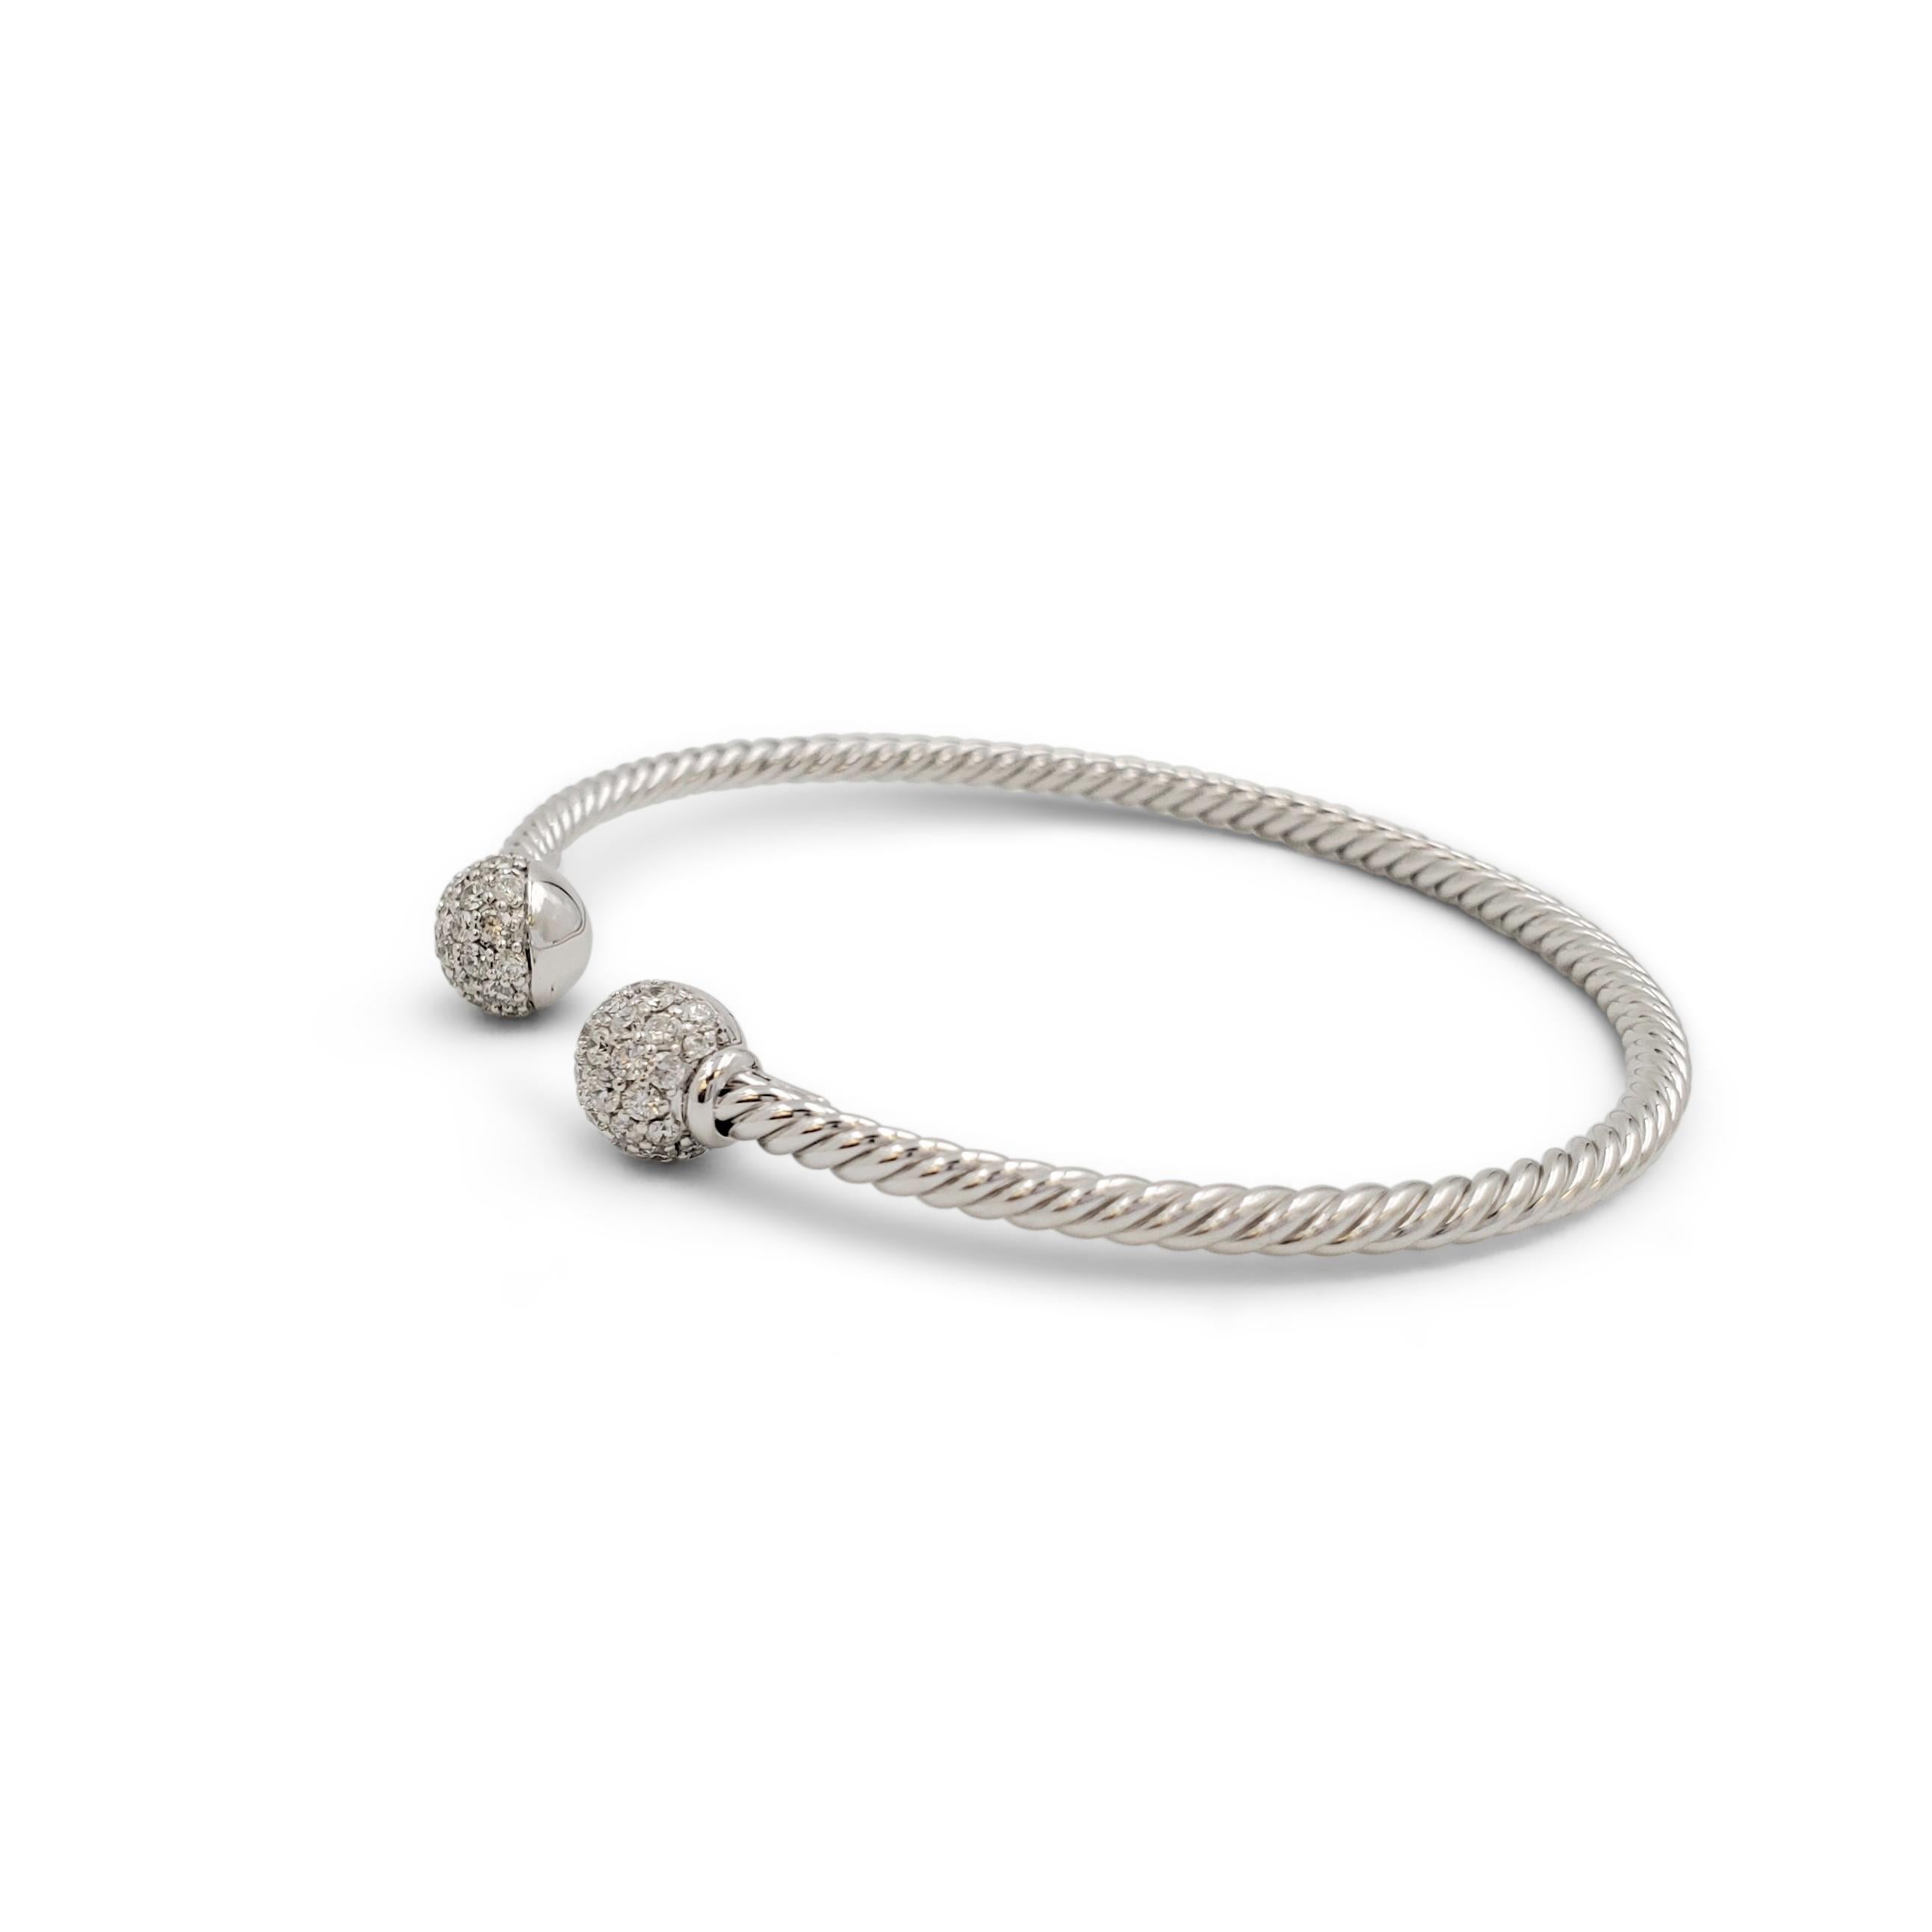 Authentic David Yurman 'Petite Solari Bead' bracelet crafted in 18 karat white gold. Each end of the thin cable-like bracelet is completed with a diamond pave set sphere. Signed DY, 750. The bracelet is not presented with the original box or papers.